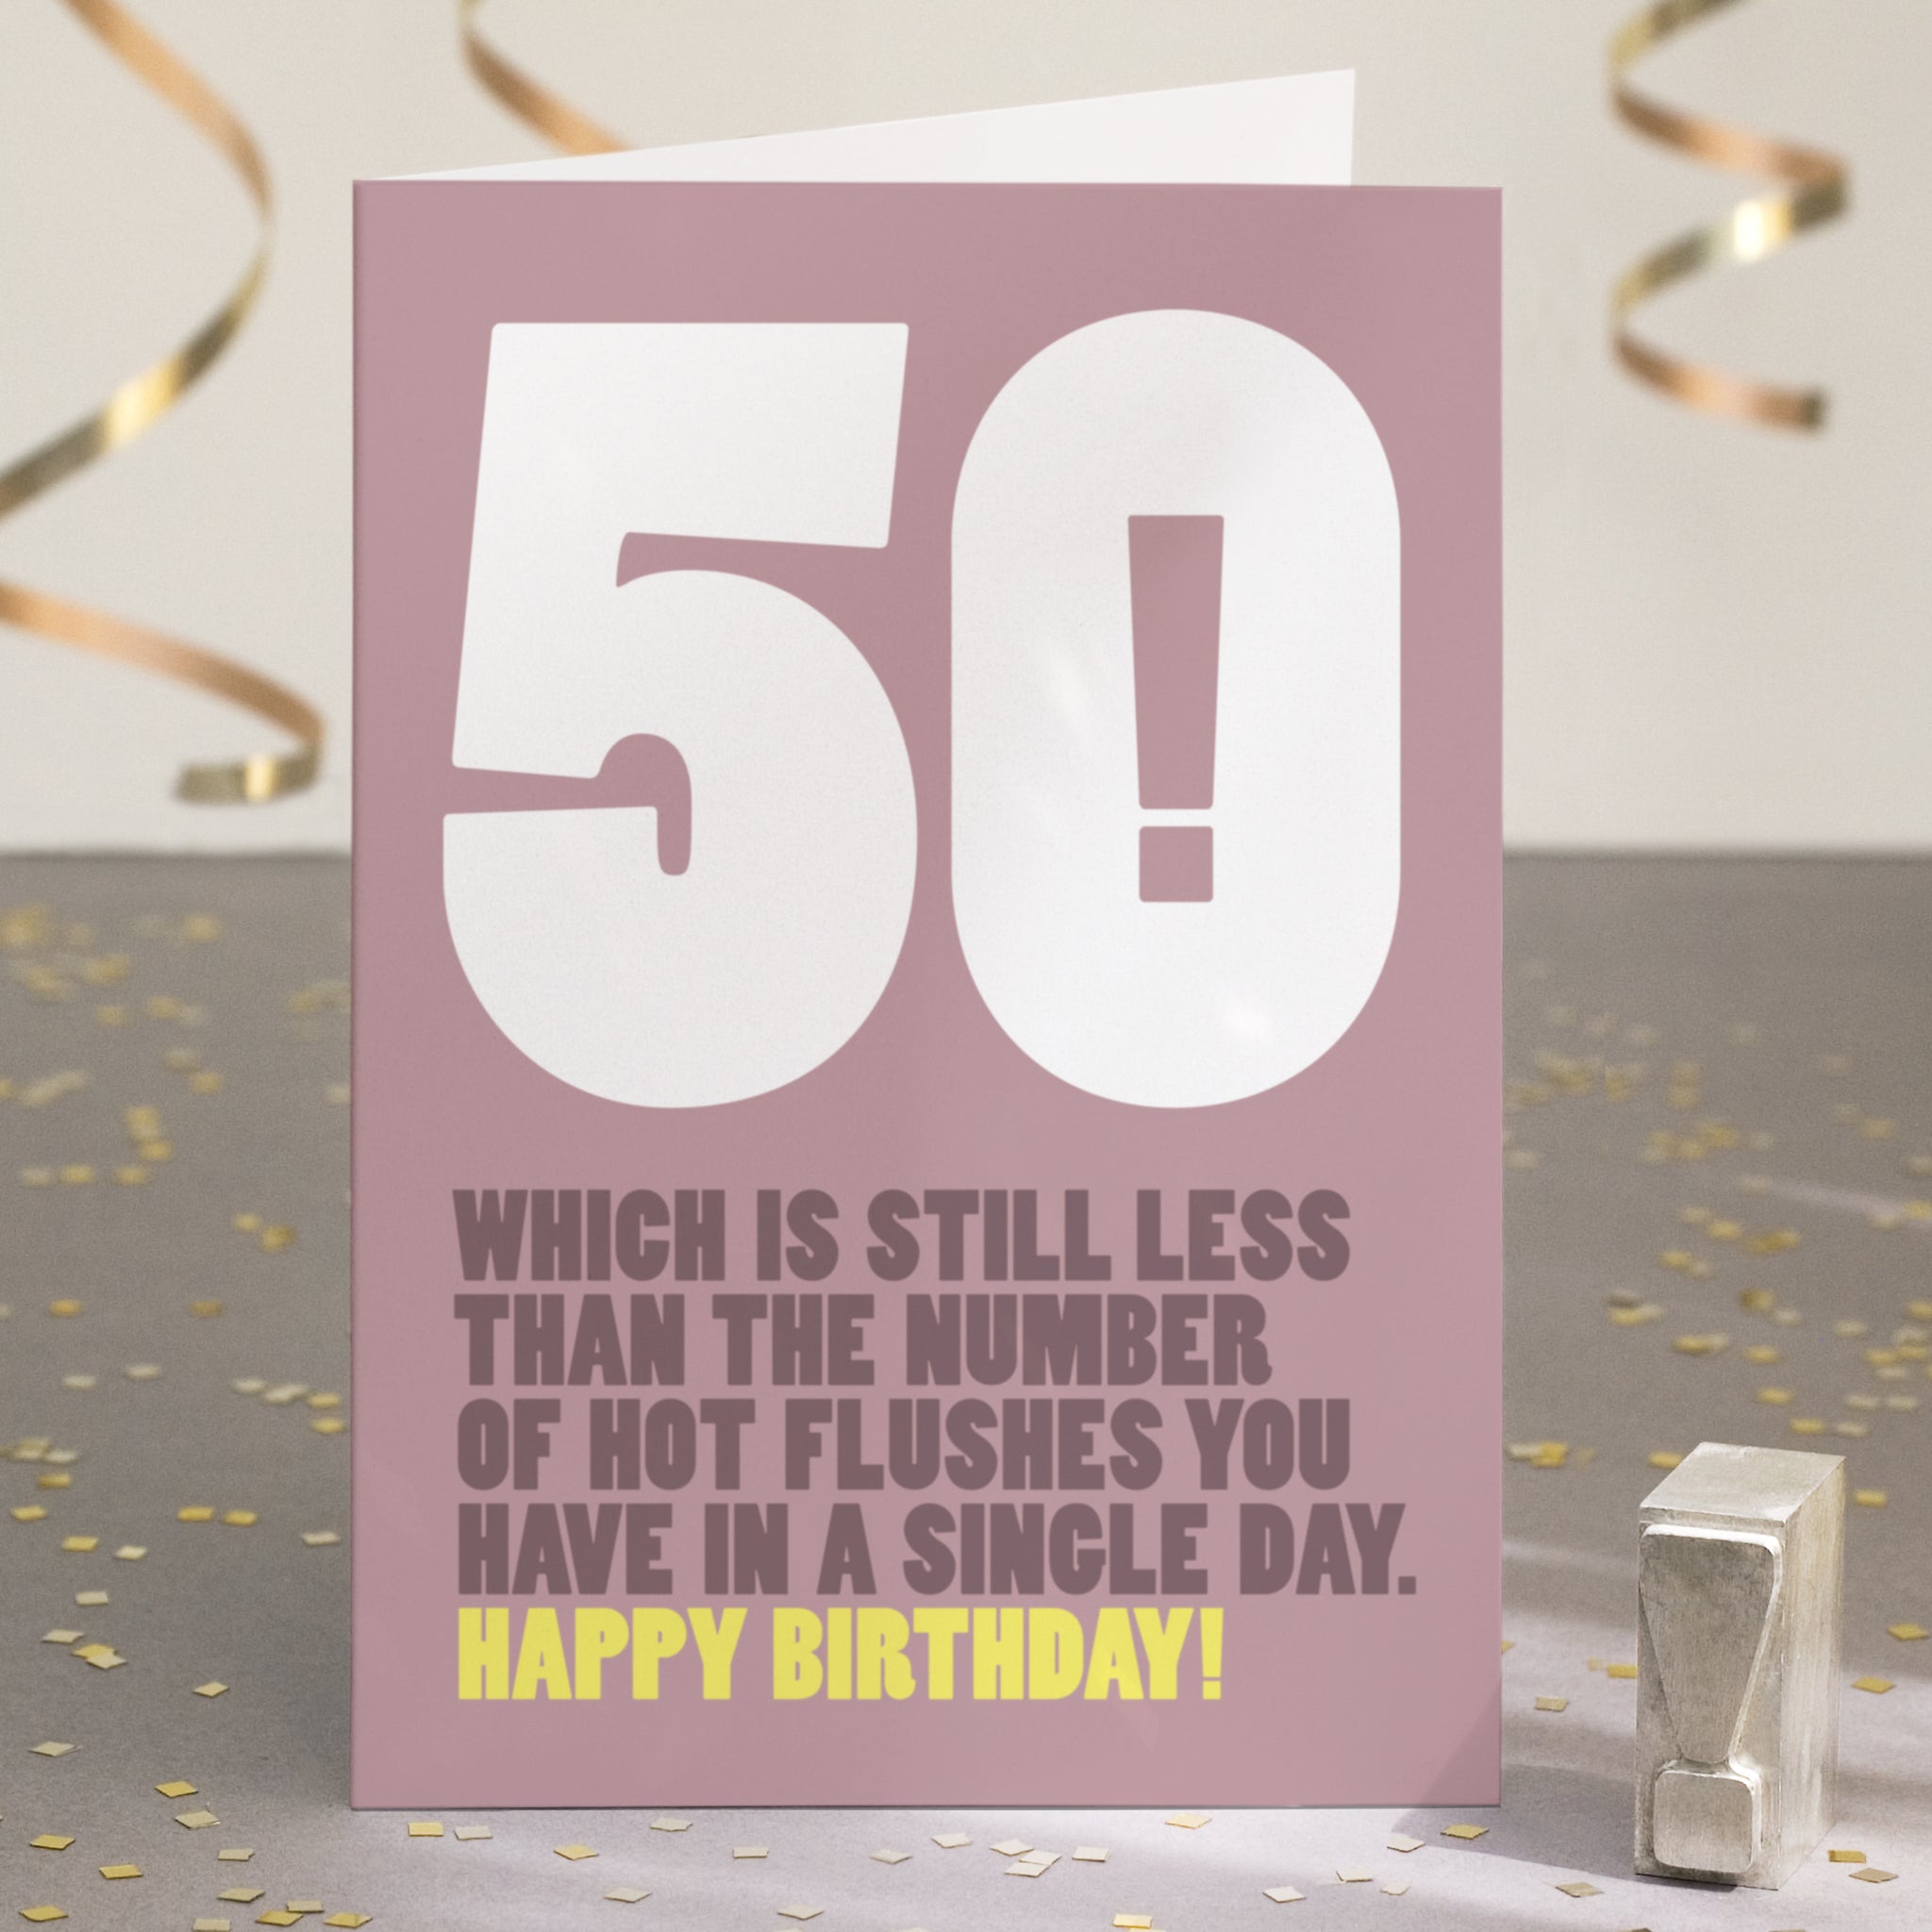 A funny 50th birthday card with the text '50, which is still less than the number of hot flushes you have in a single day'.